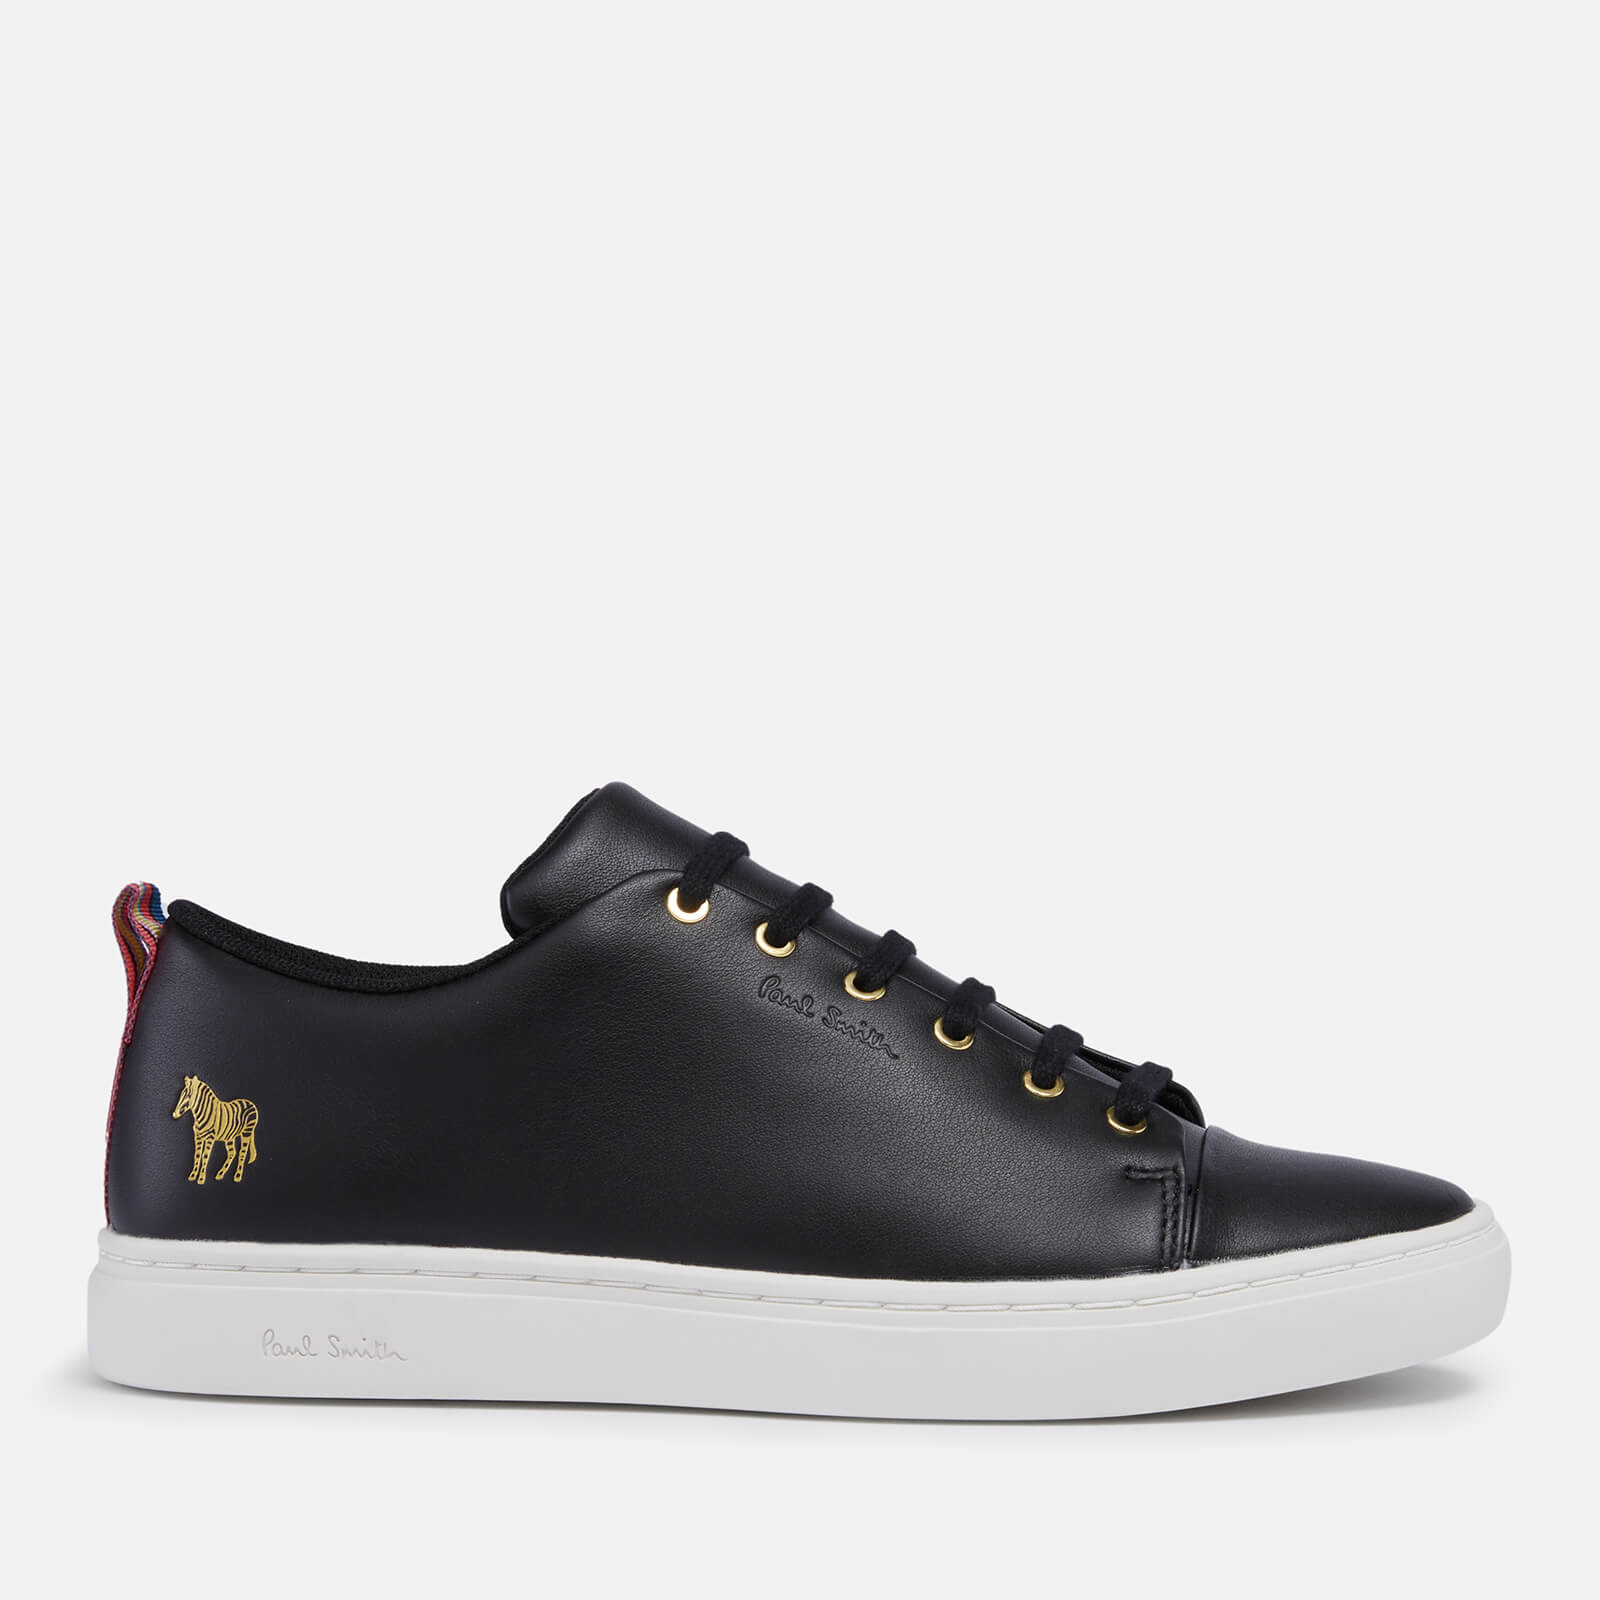 Paul Smith Women's Lee Leather Cupsole Trainers - Black - UK 3